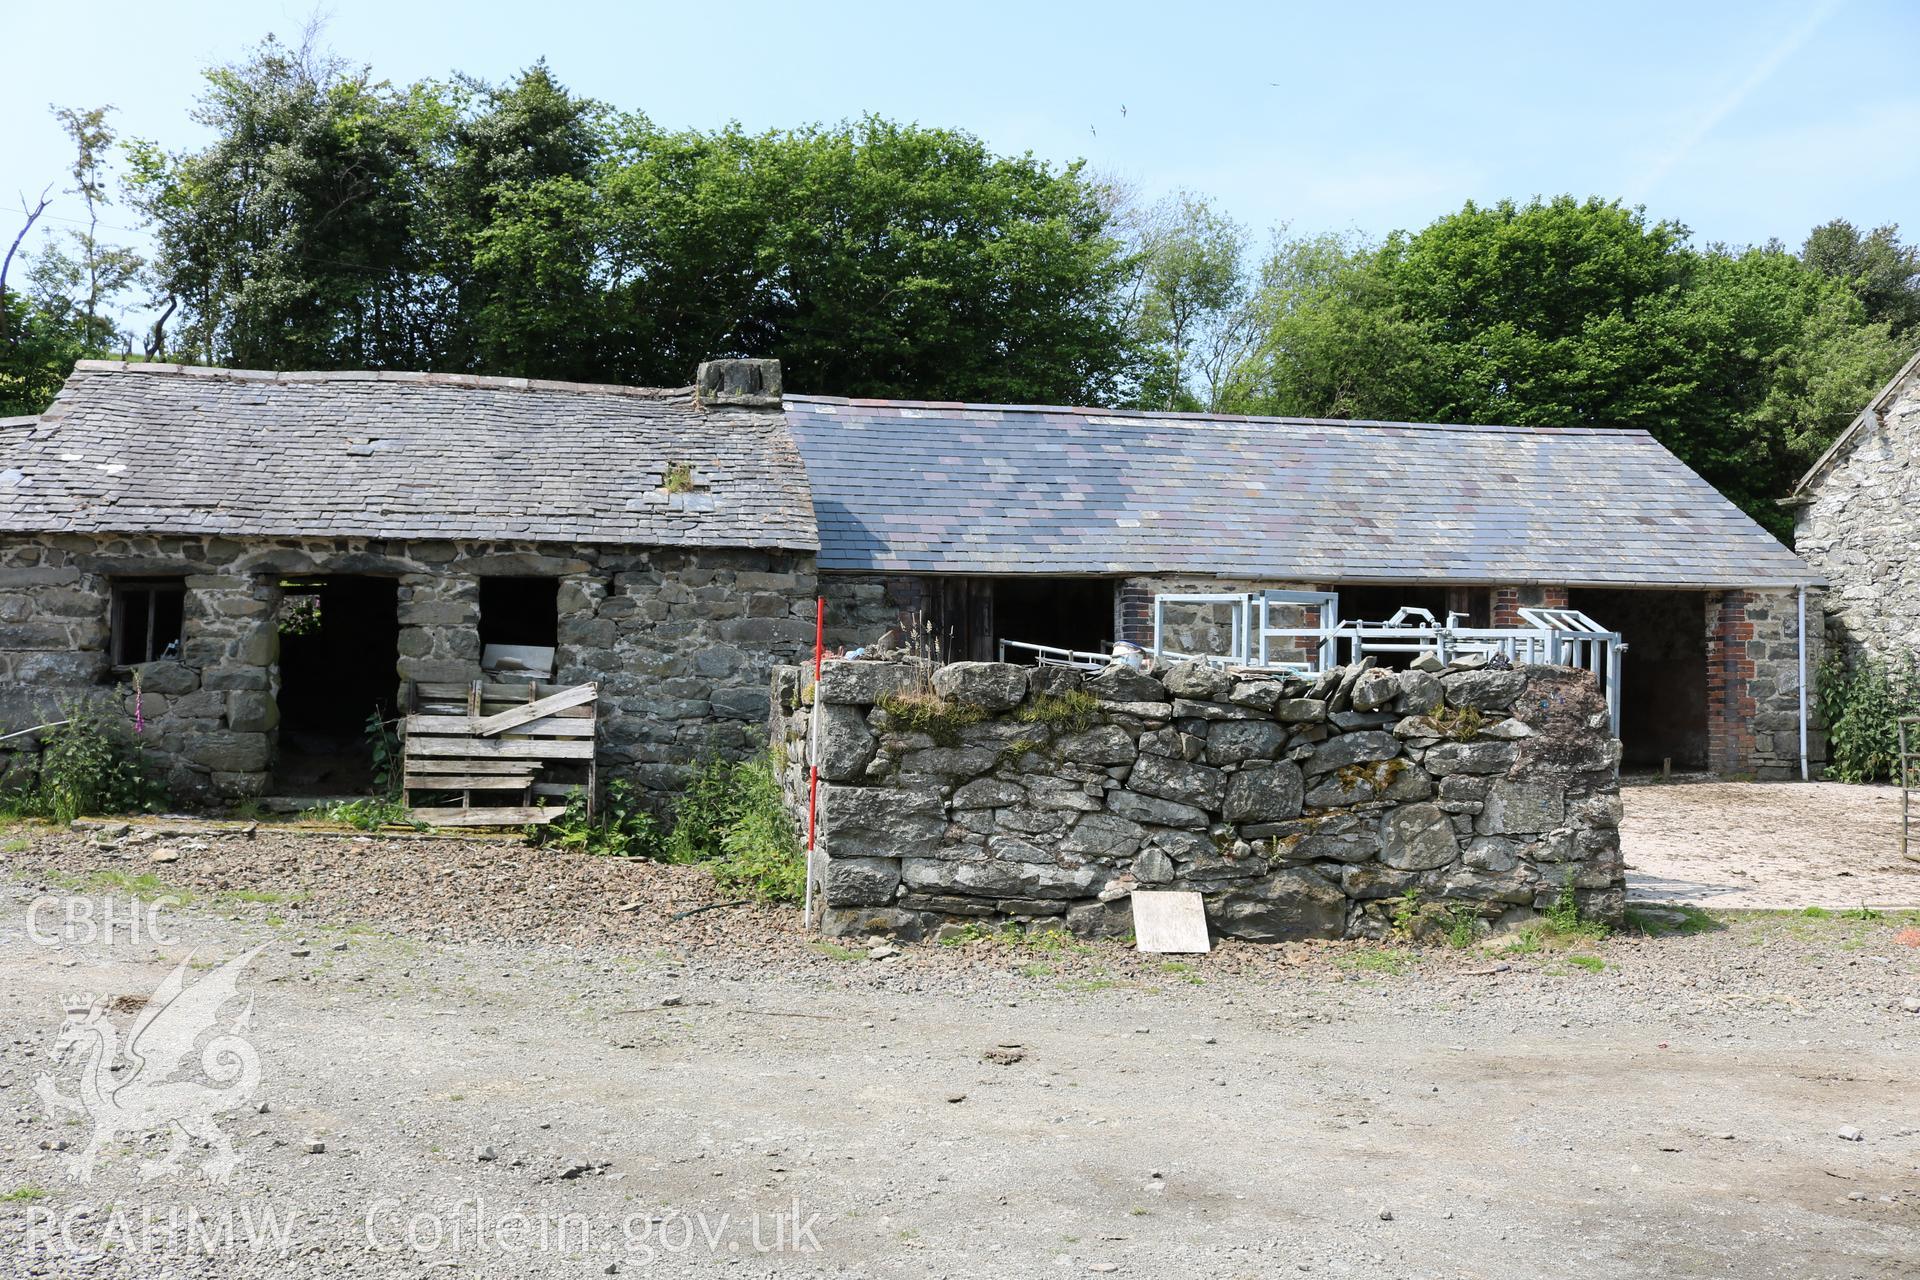 Photograph showing external view of byre house, brew house and shippon, at Maes yr Hendre, taken by Dr Marian Gwyn, 6th July 2016. (Original Reference no. 0173)